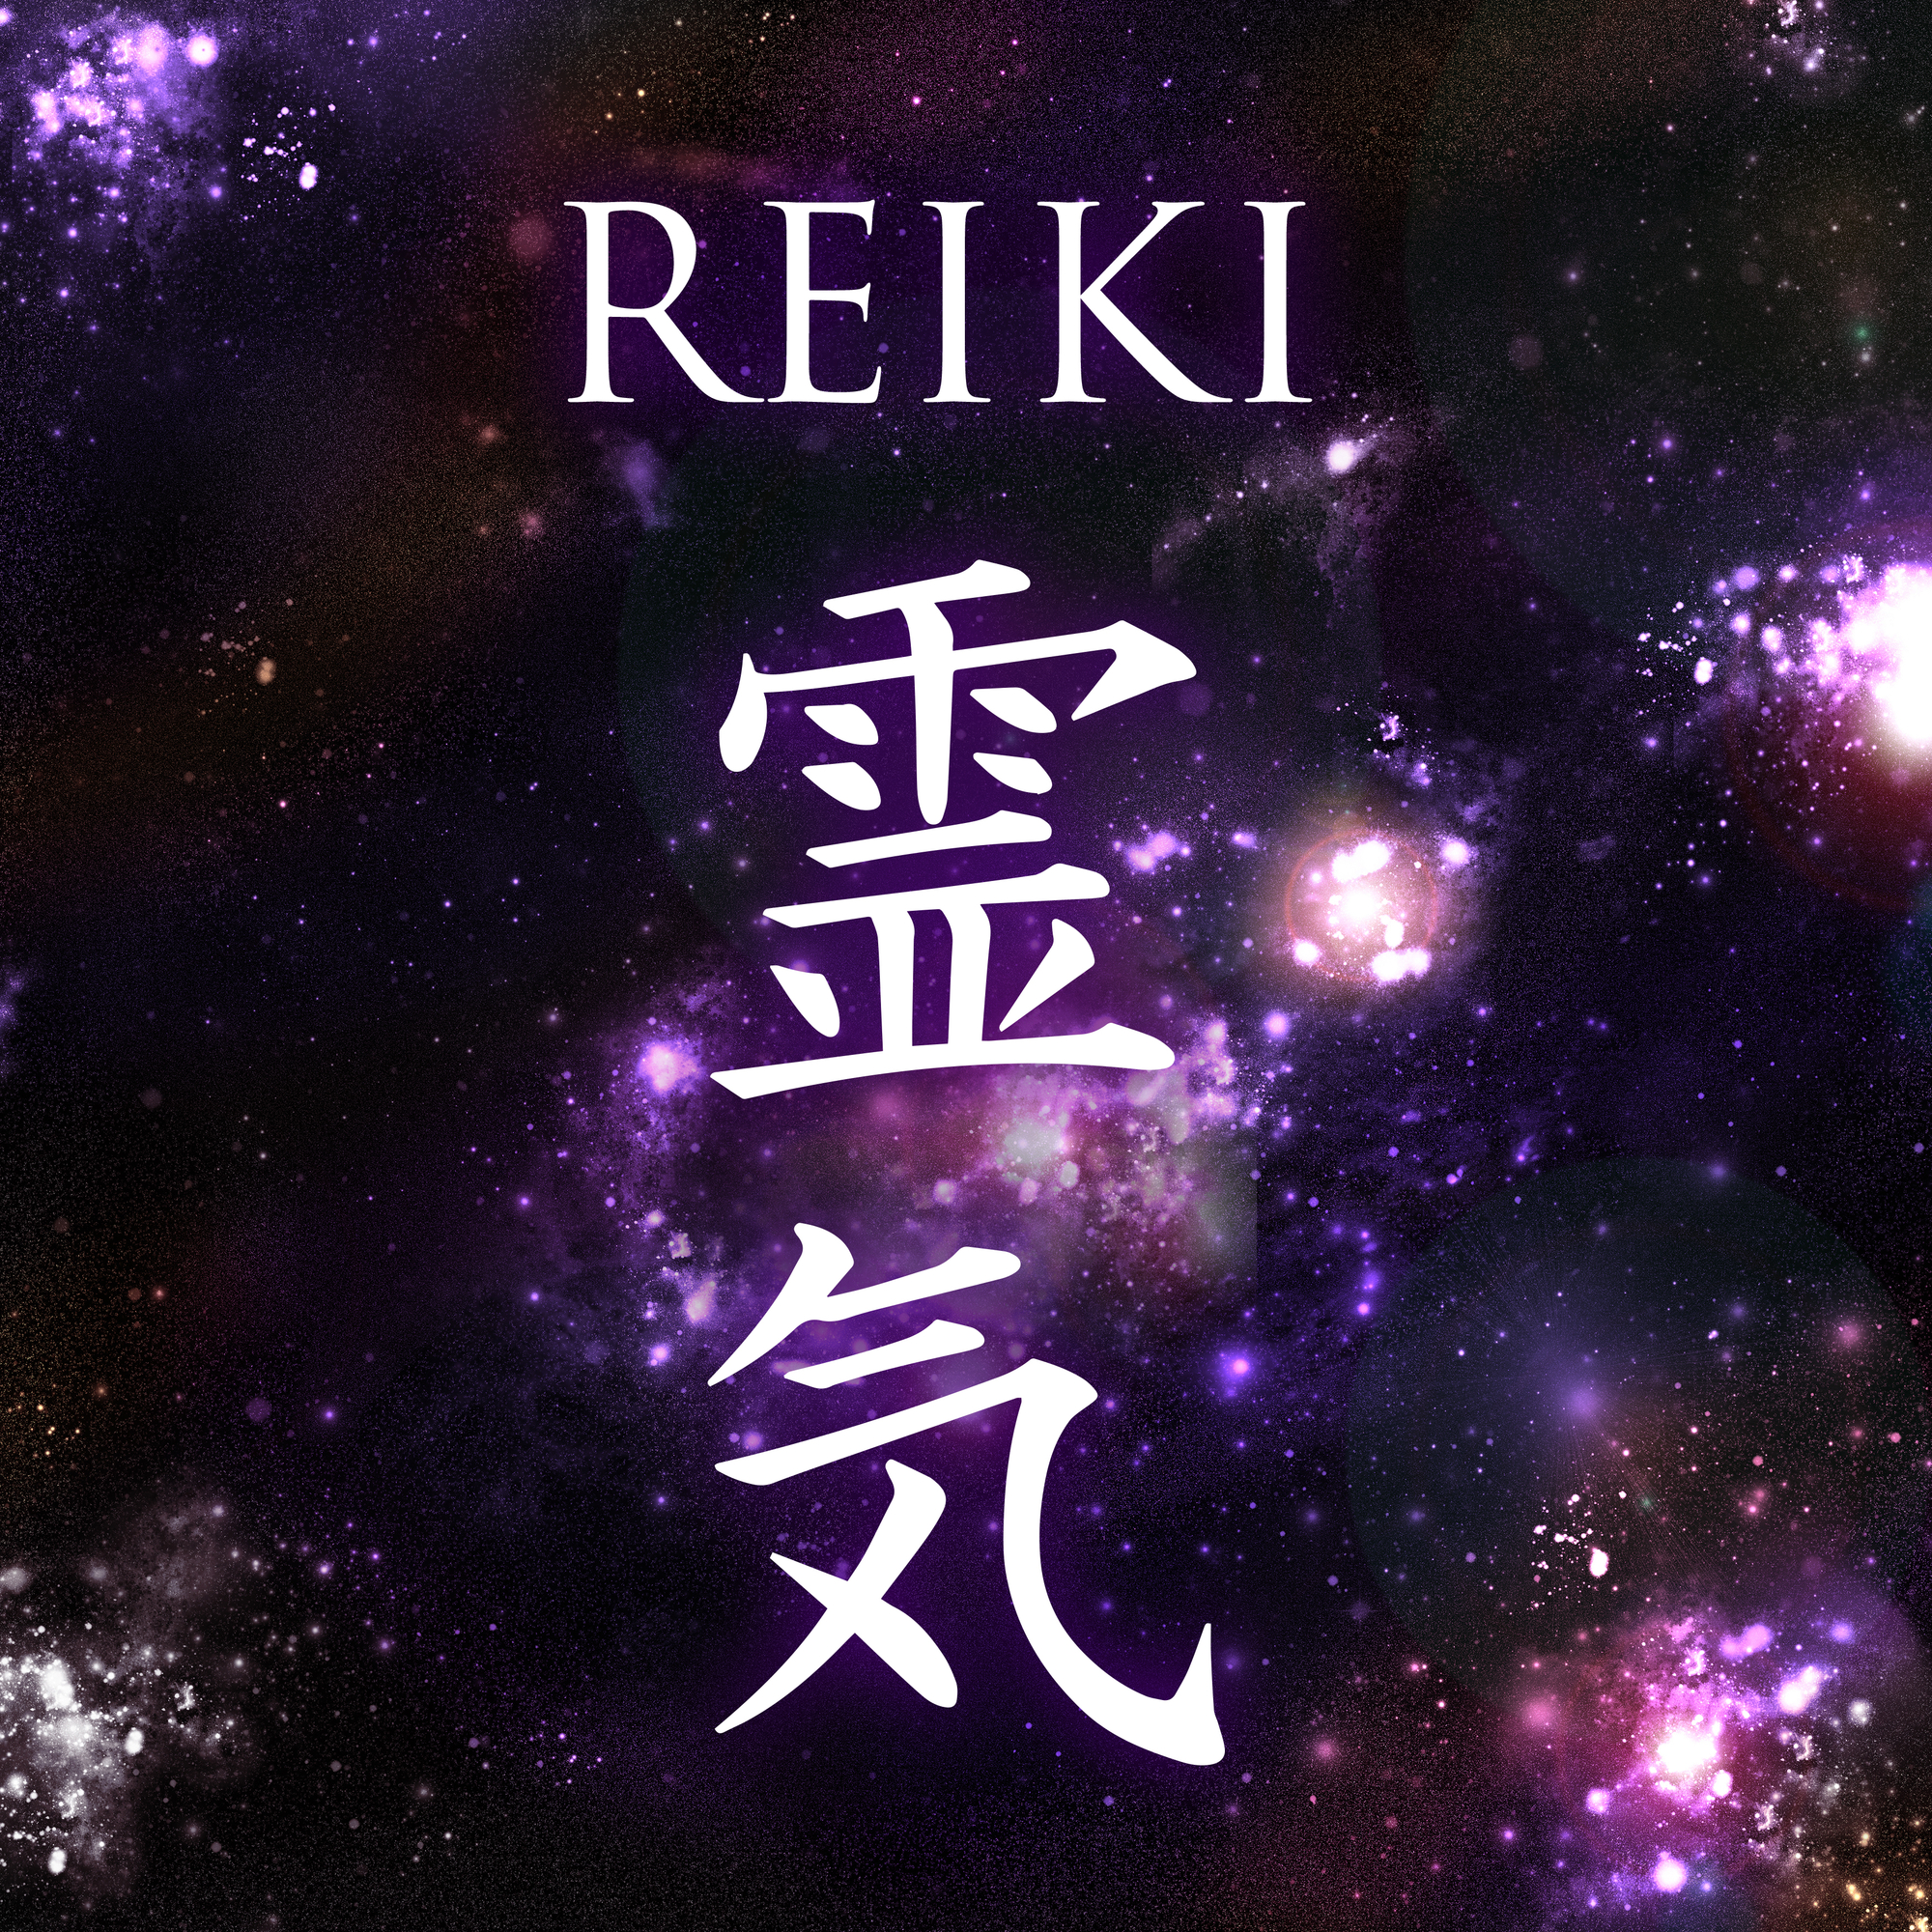 Sacred geometry. Reiki symbol. The word Reiki is made up of two Japanese words, Rei means ‘Universal’ – Ki means ‘life force energy’.